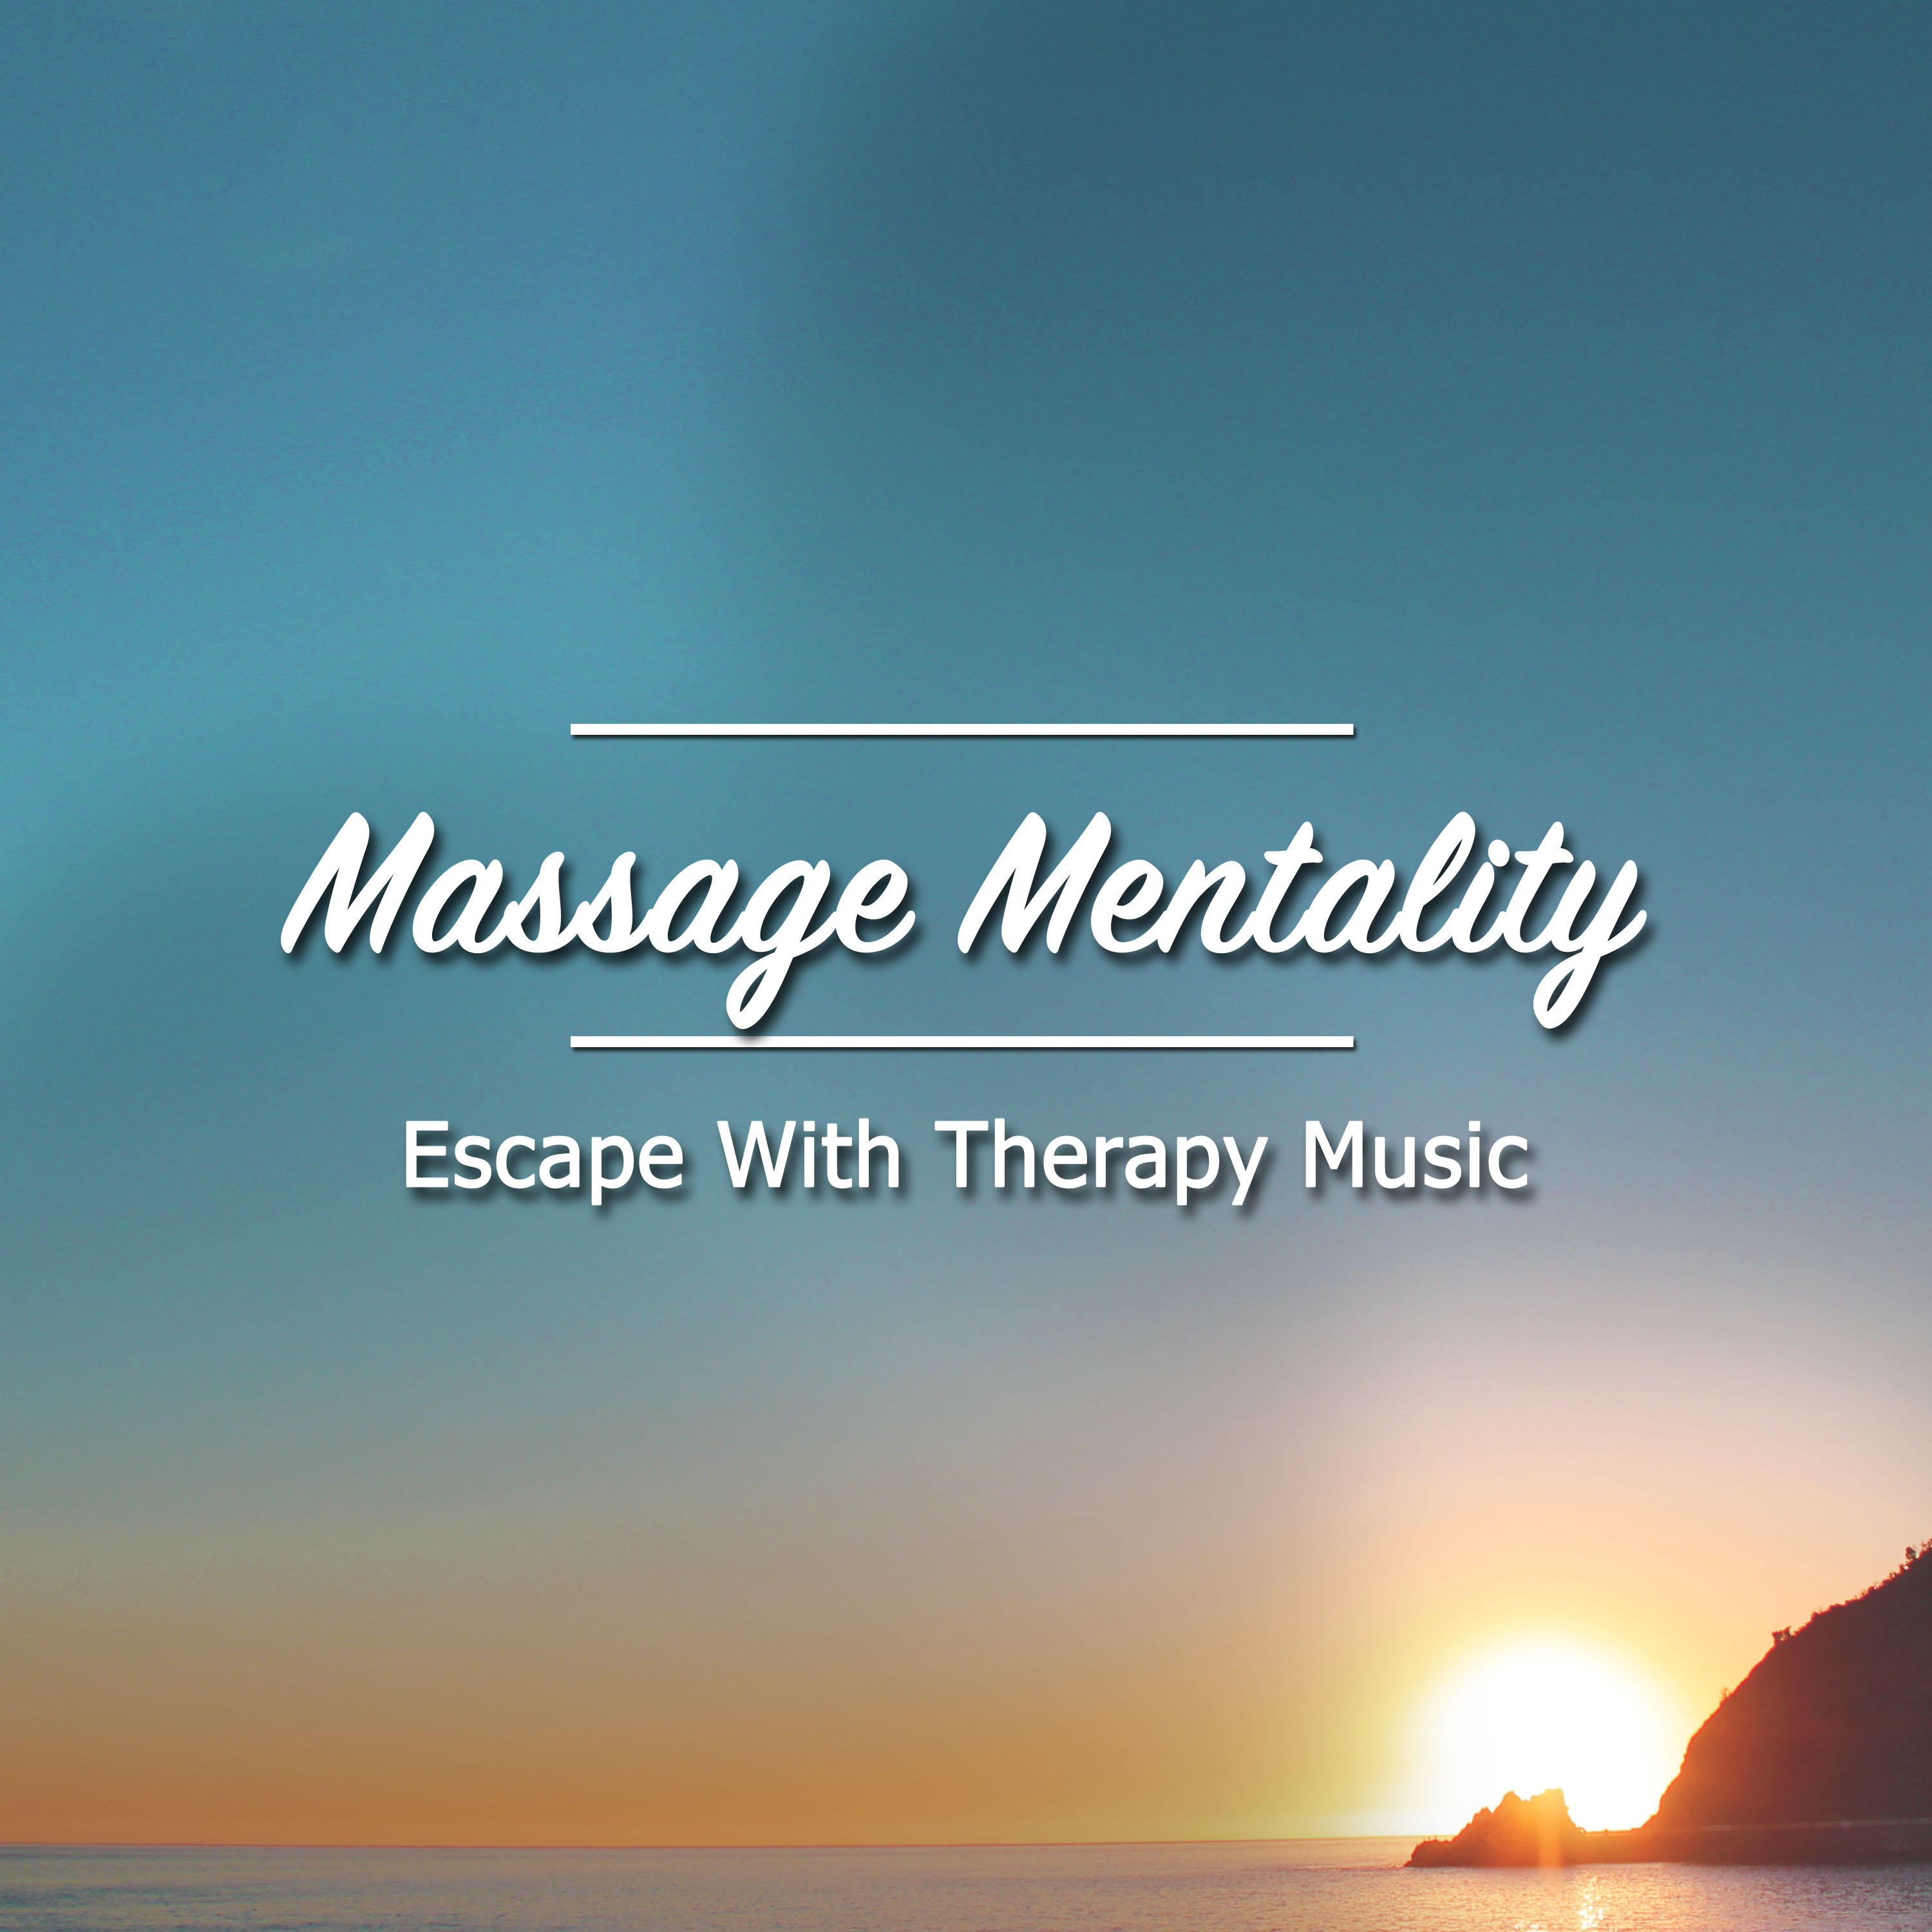 12 Massage Mentality - Escape With Therapy Music